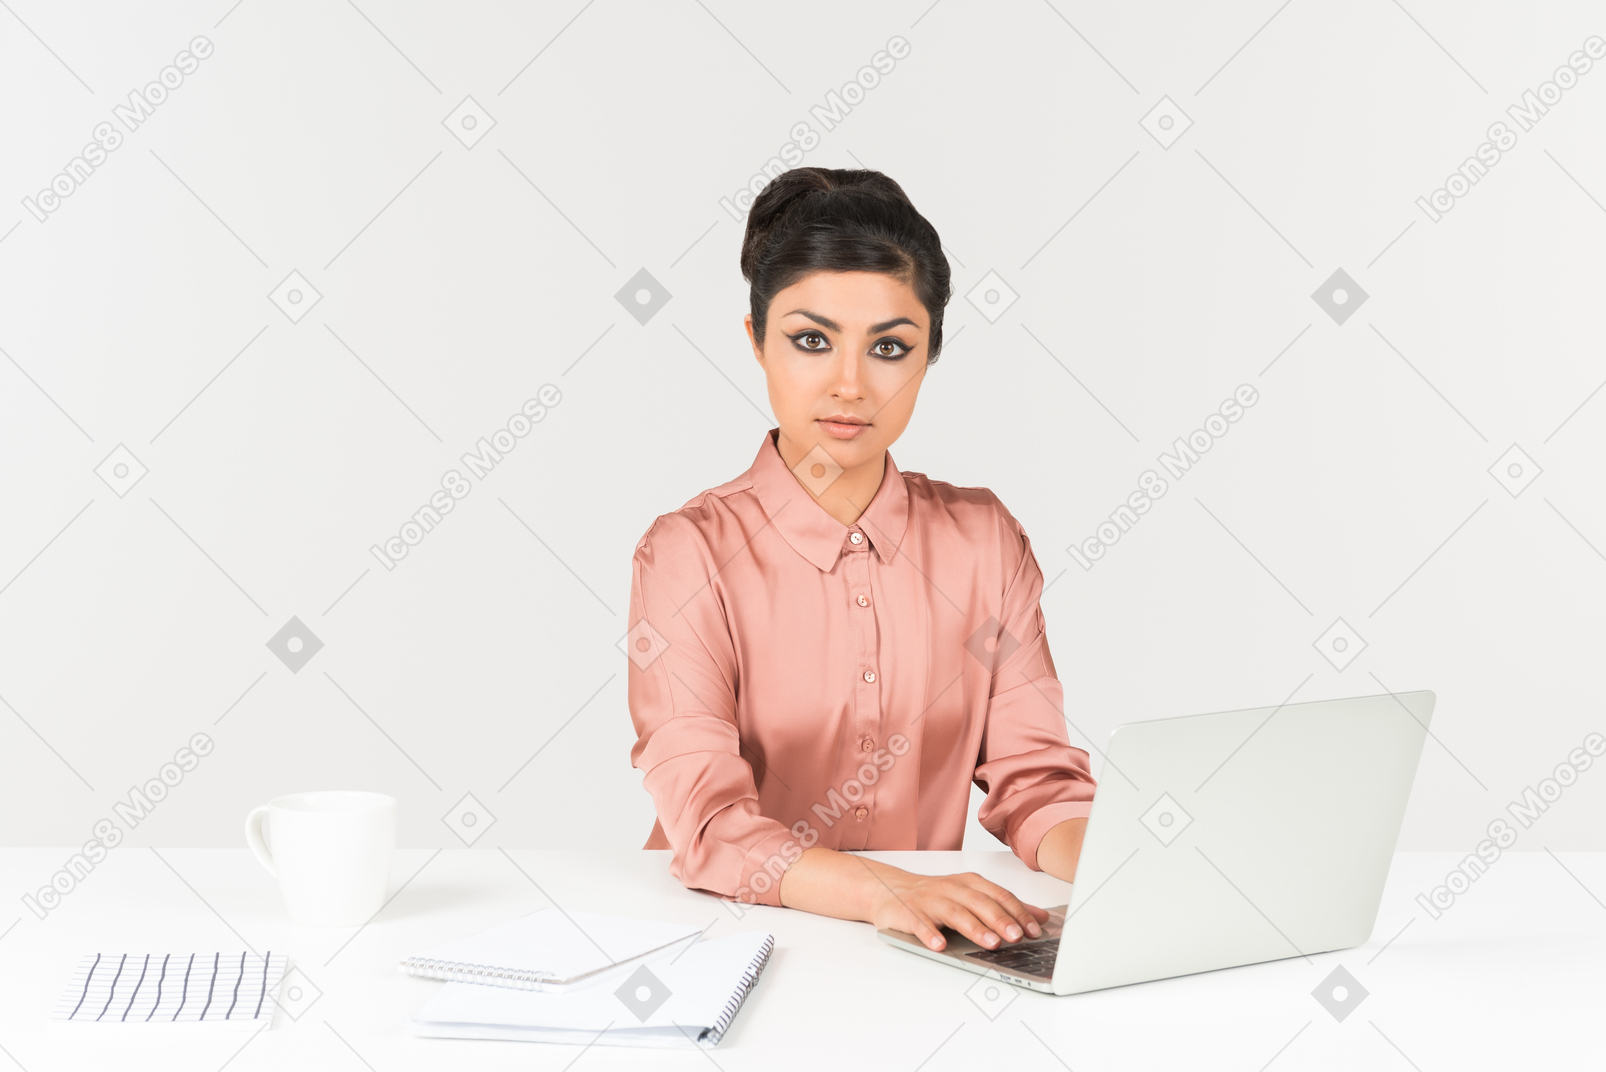 Young indian office worker working on laptop and looking right into camera